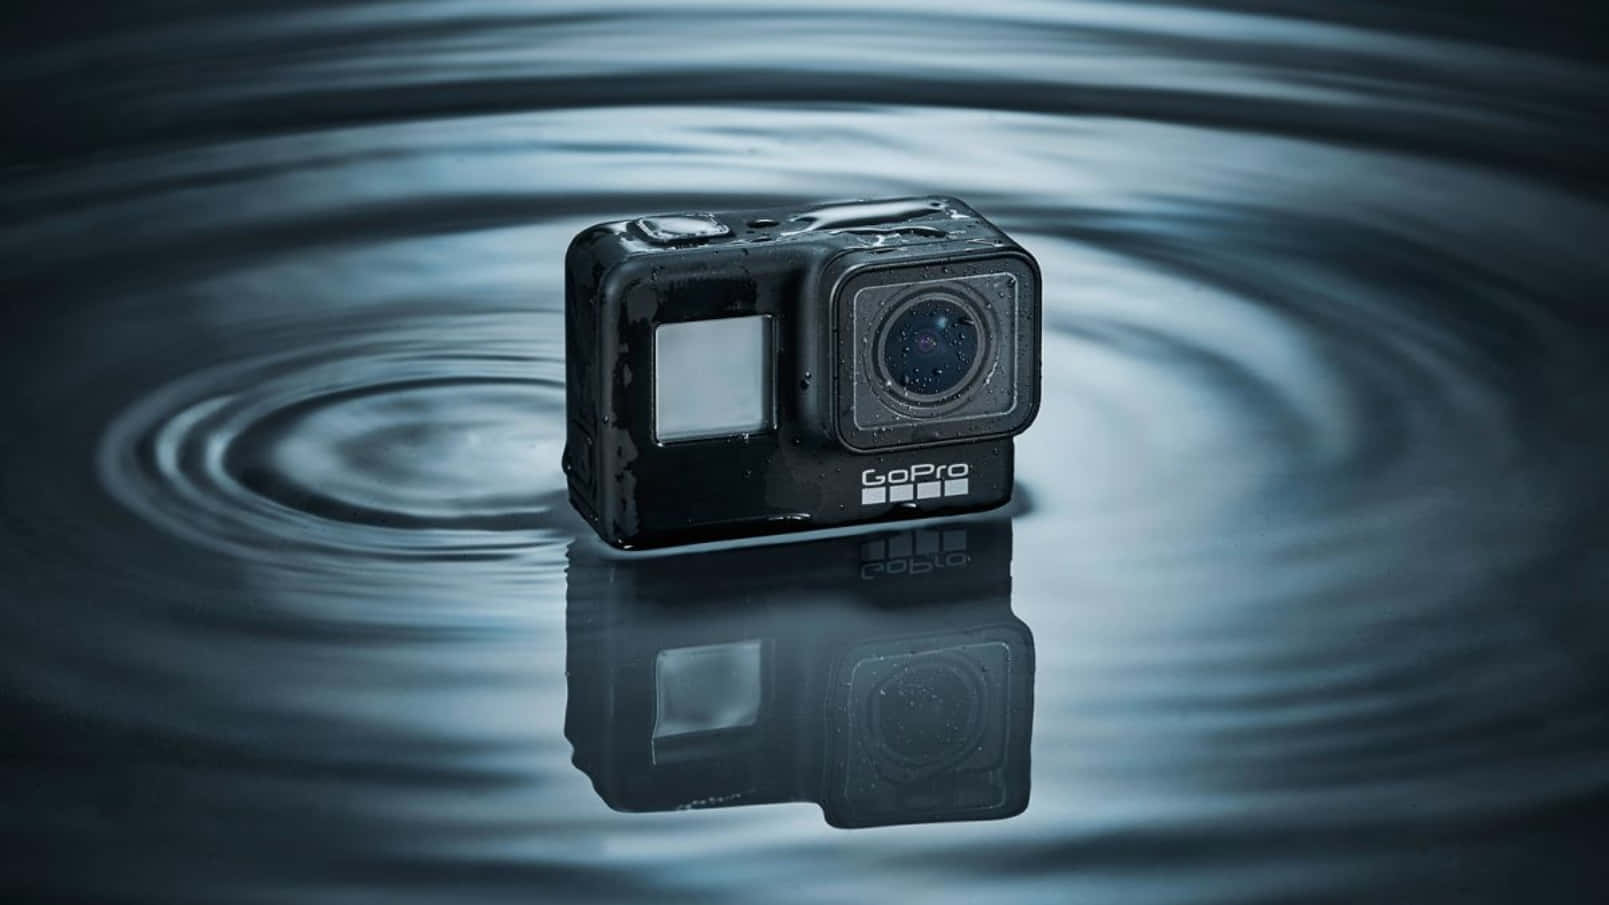 Spend your days exploring new landscapes with the versatility of a GoPro!